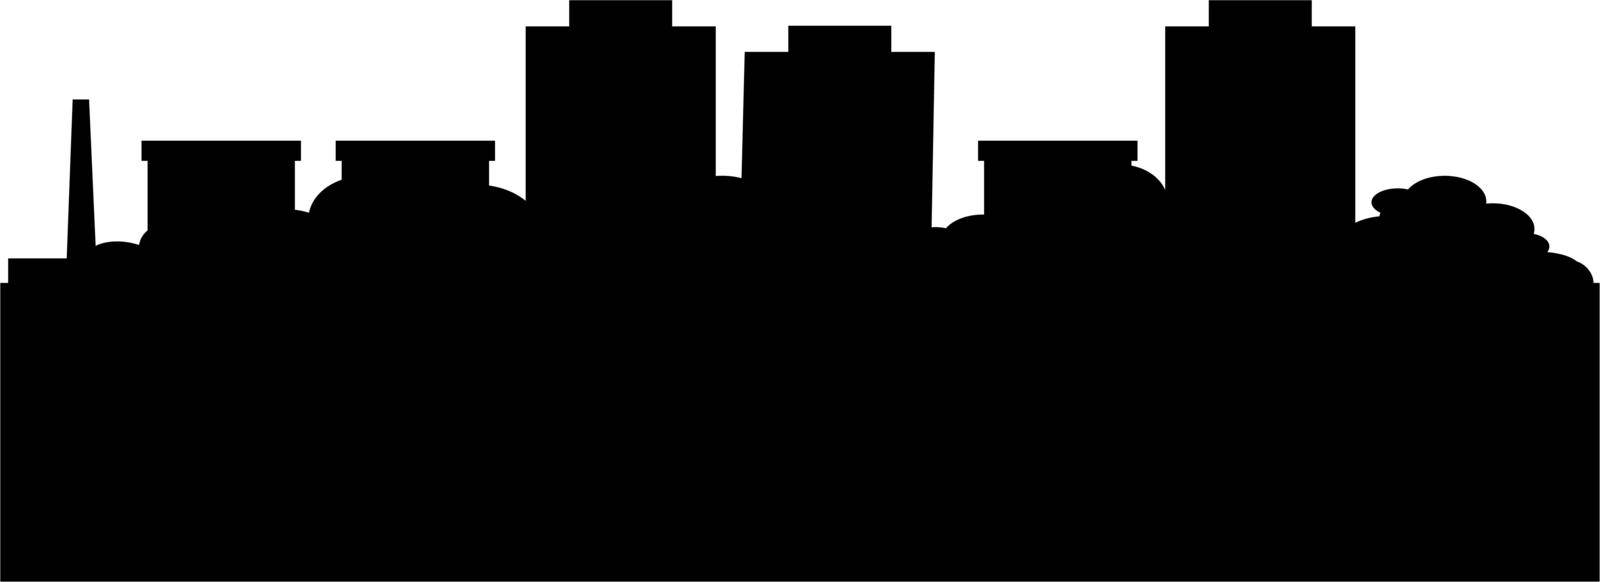 Silhouette of city with black color on white background. Vector illustration